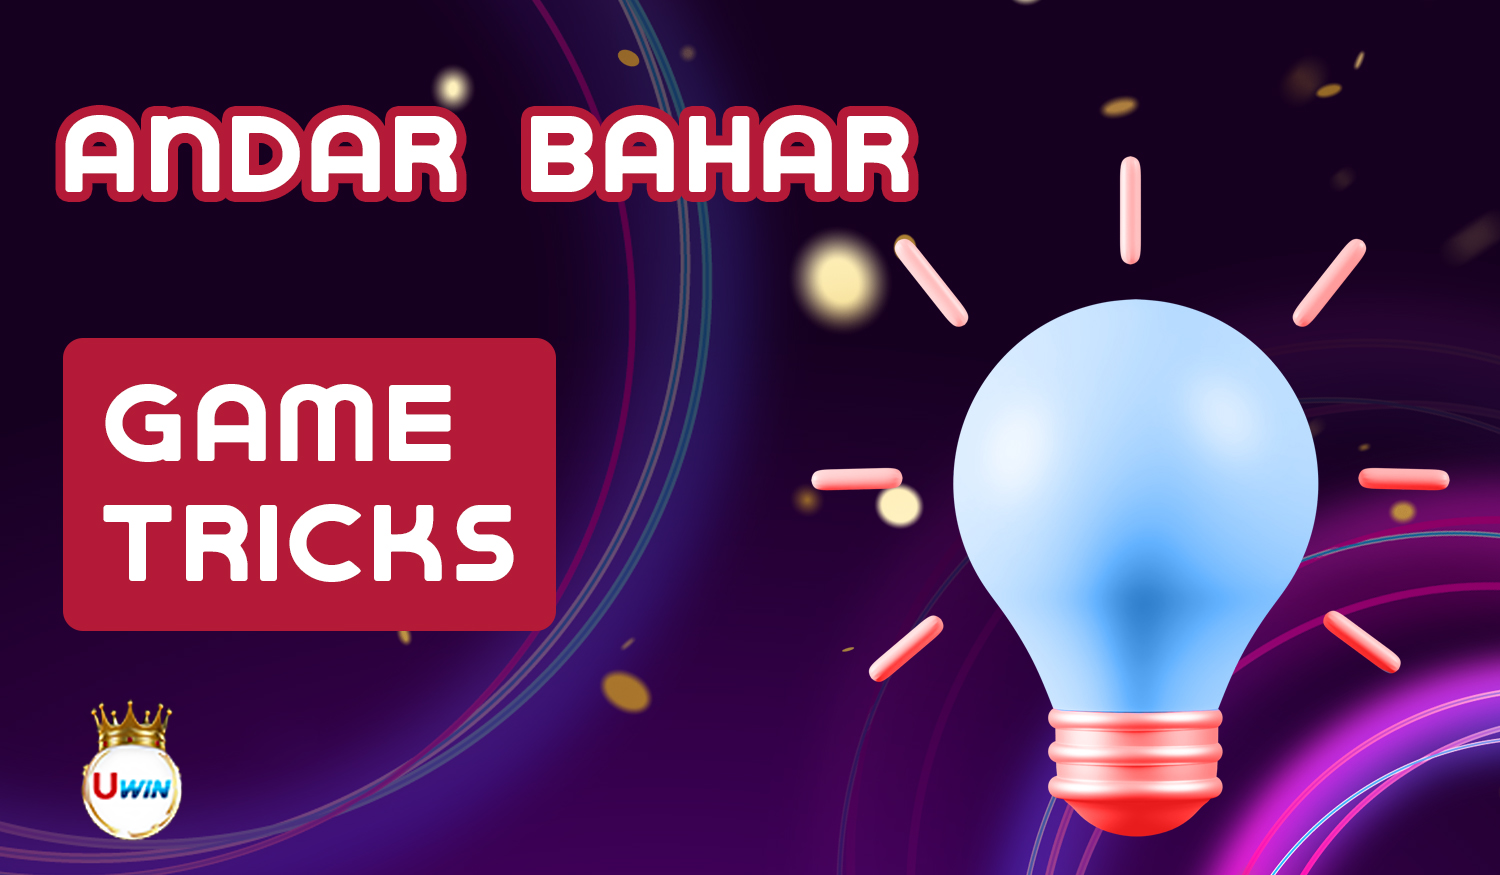 Use these useful tips for playing Andar Bahar on Uwin